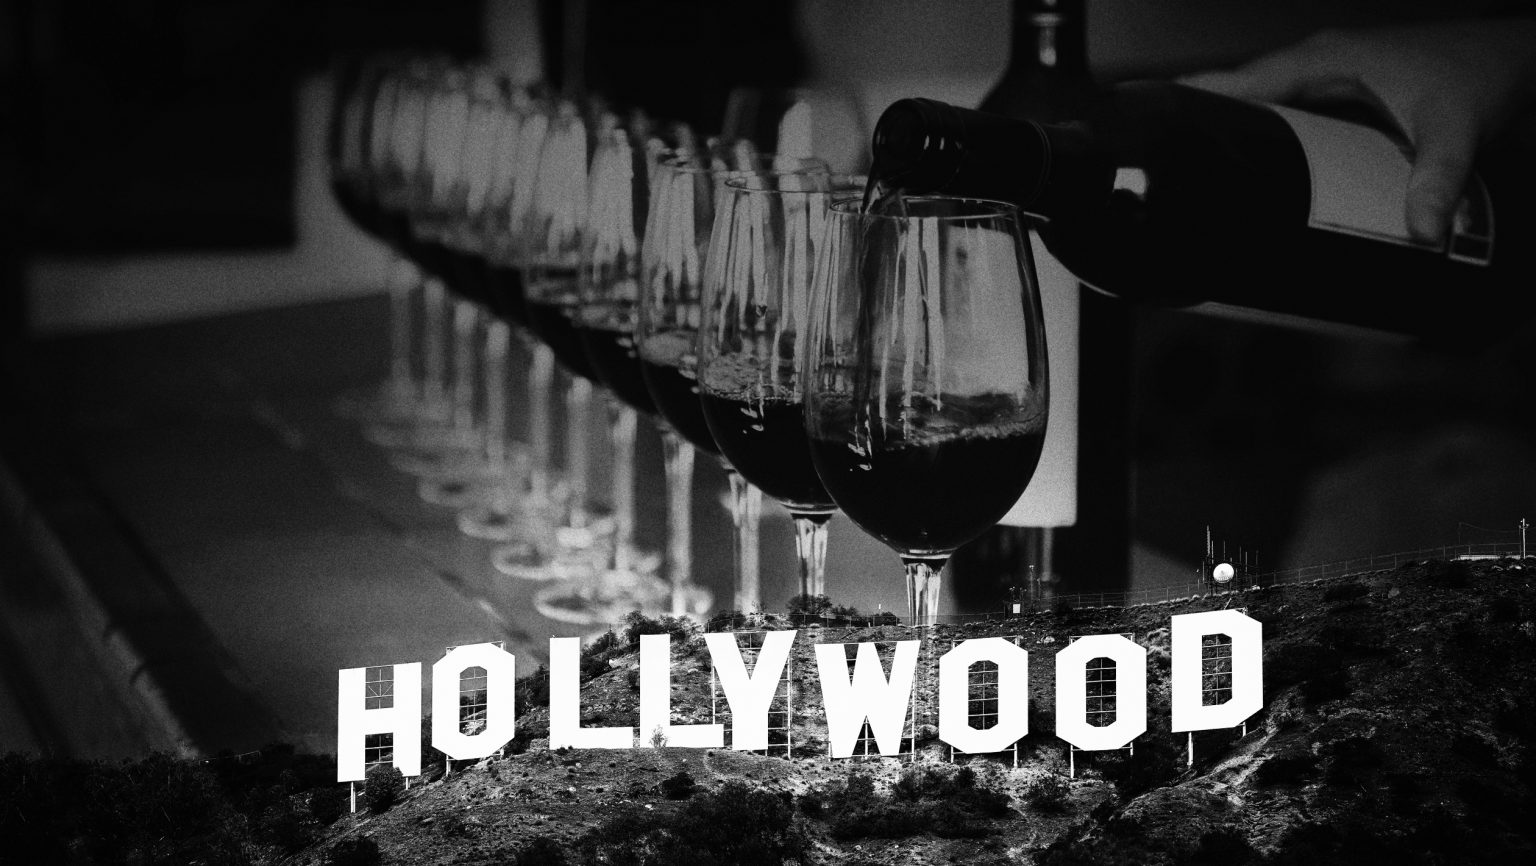 Image for The Tasting Group That Launched the L.A. Wine Scene | SevenFifty Daily